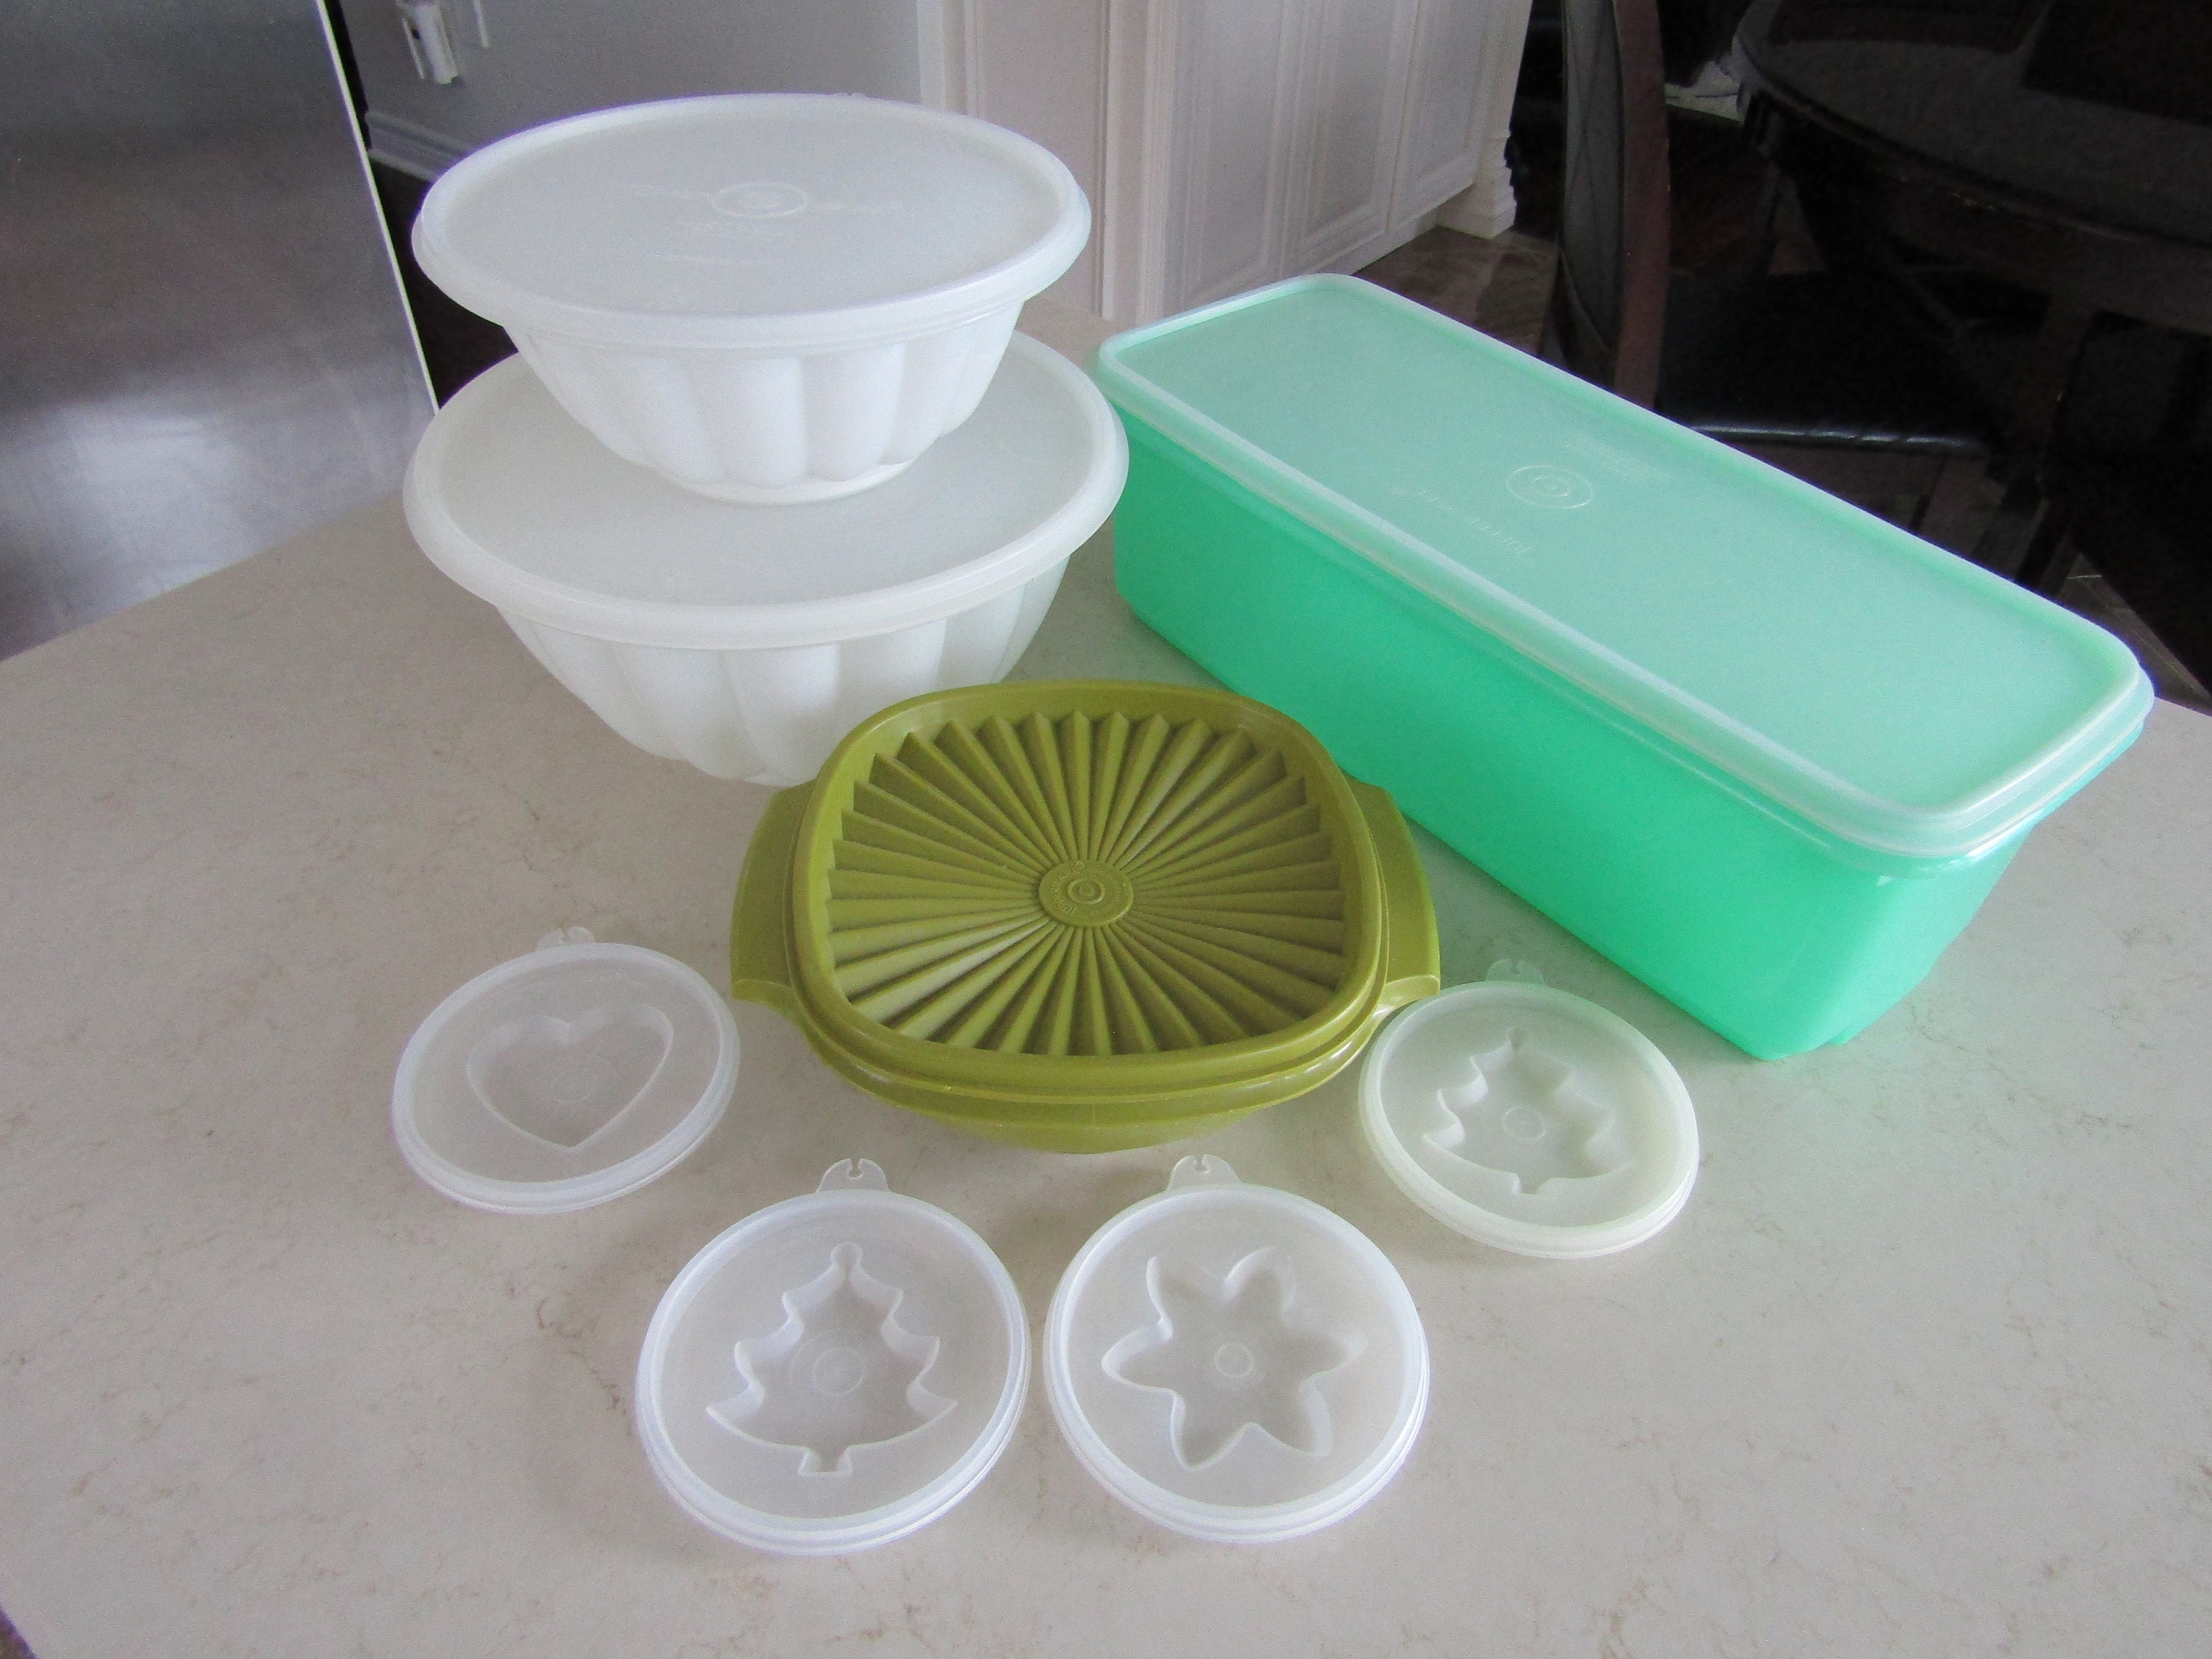 Vintage Tupperware Containers 